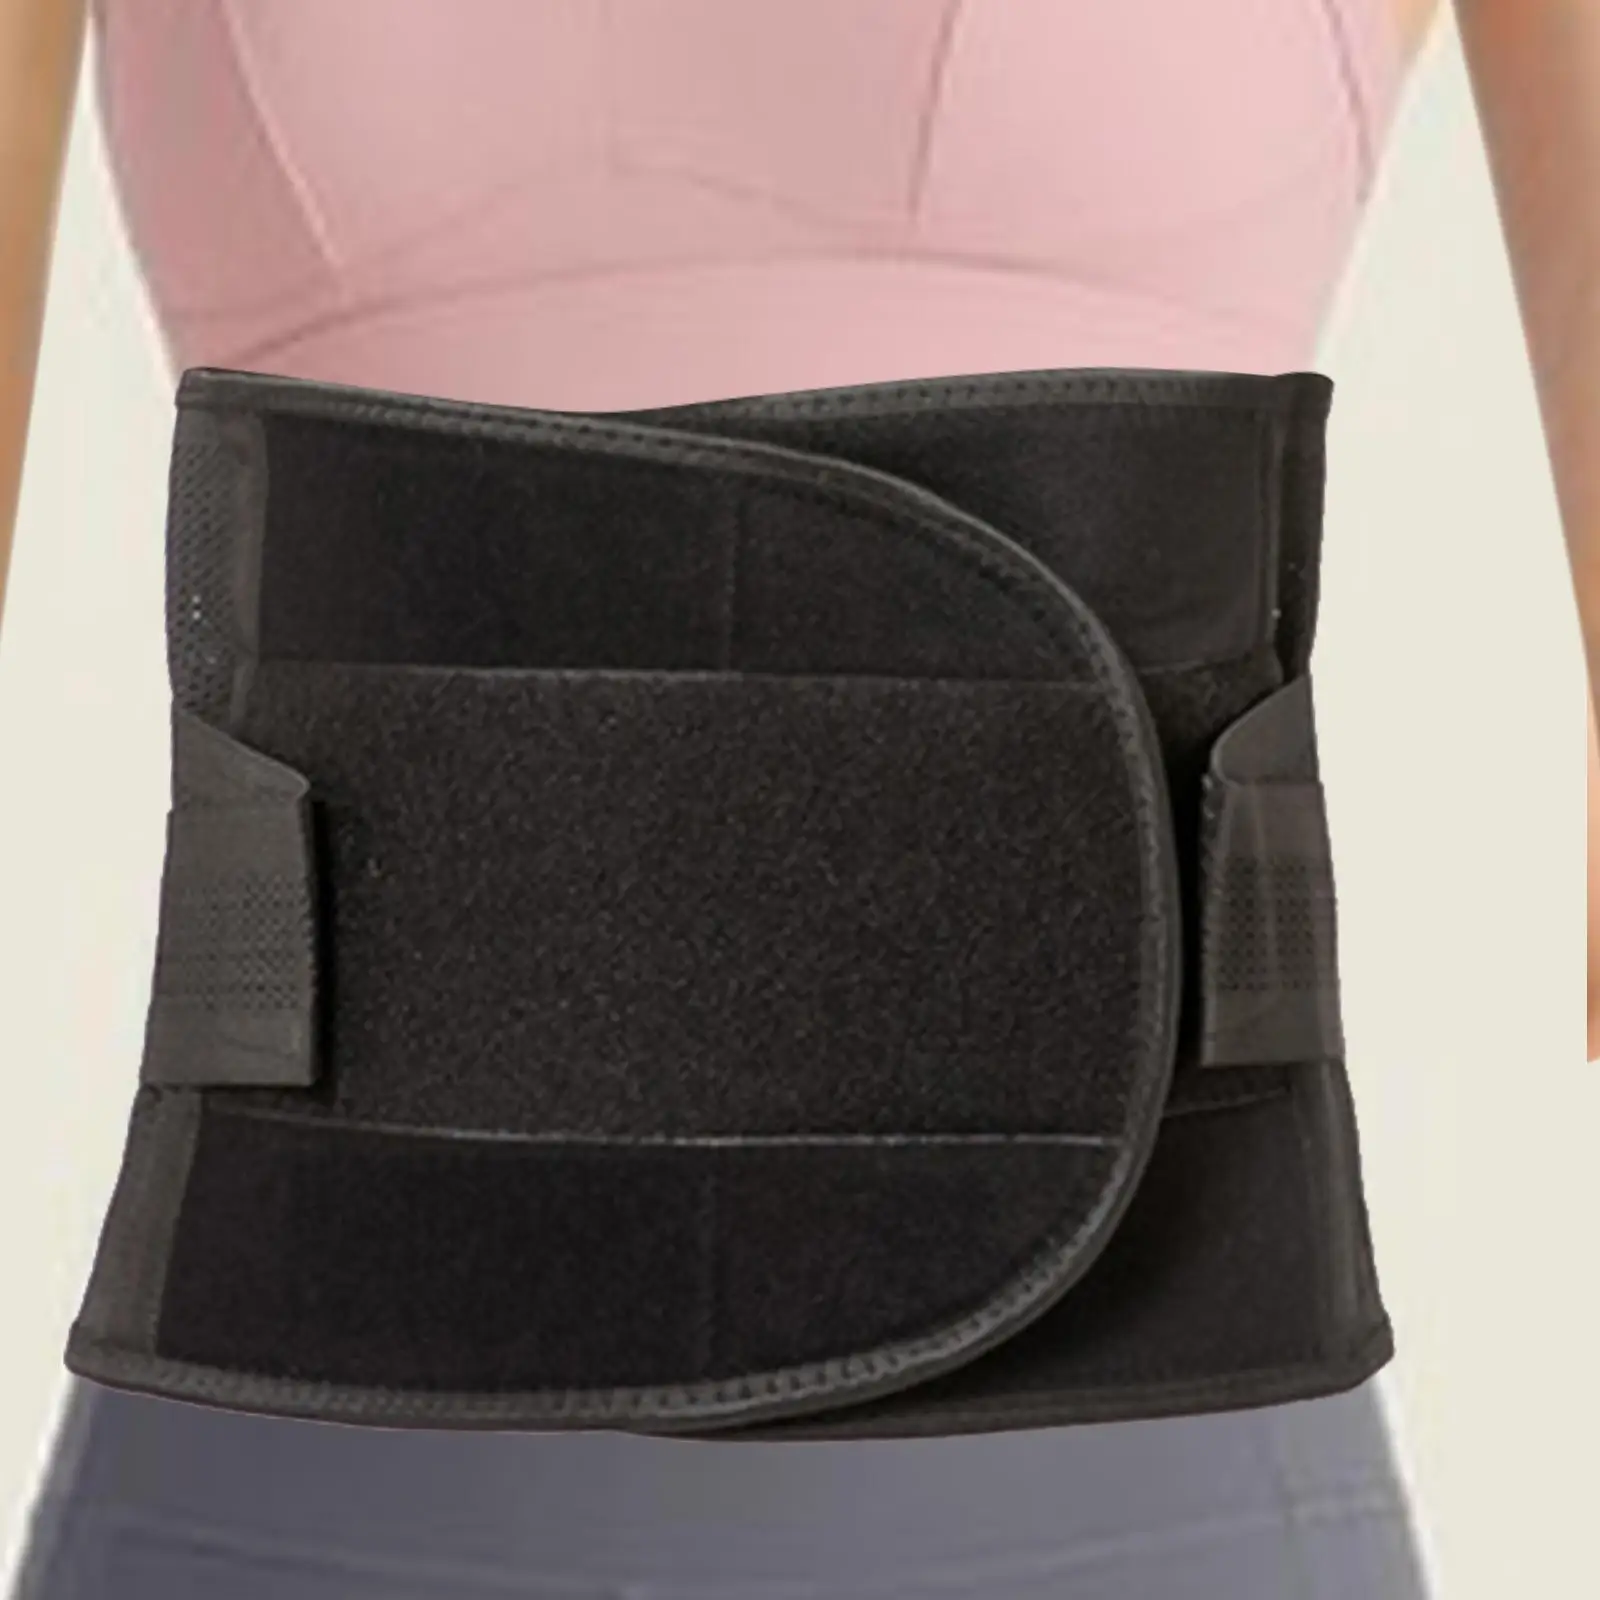 Support Belt Stomach and Back Support Belt for Lifting